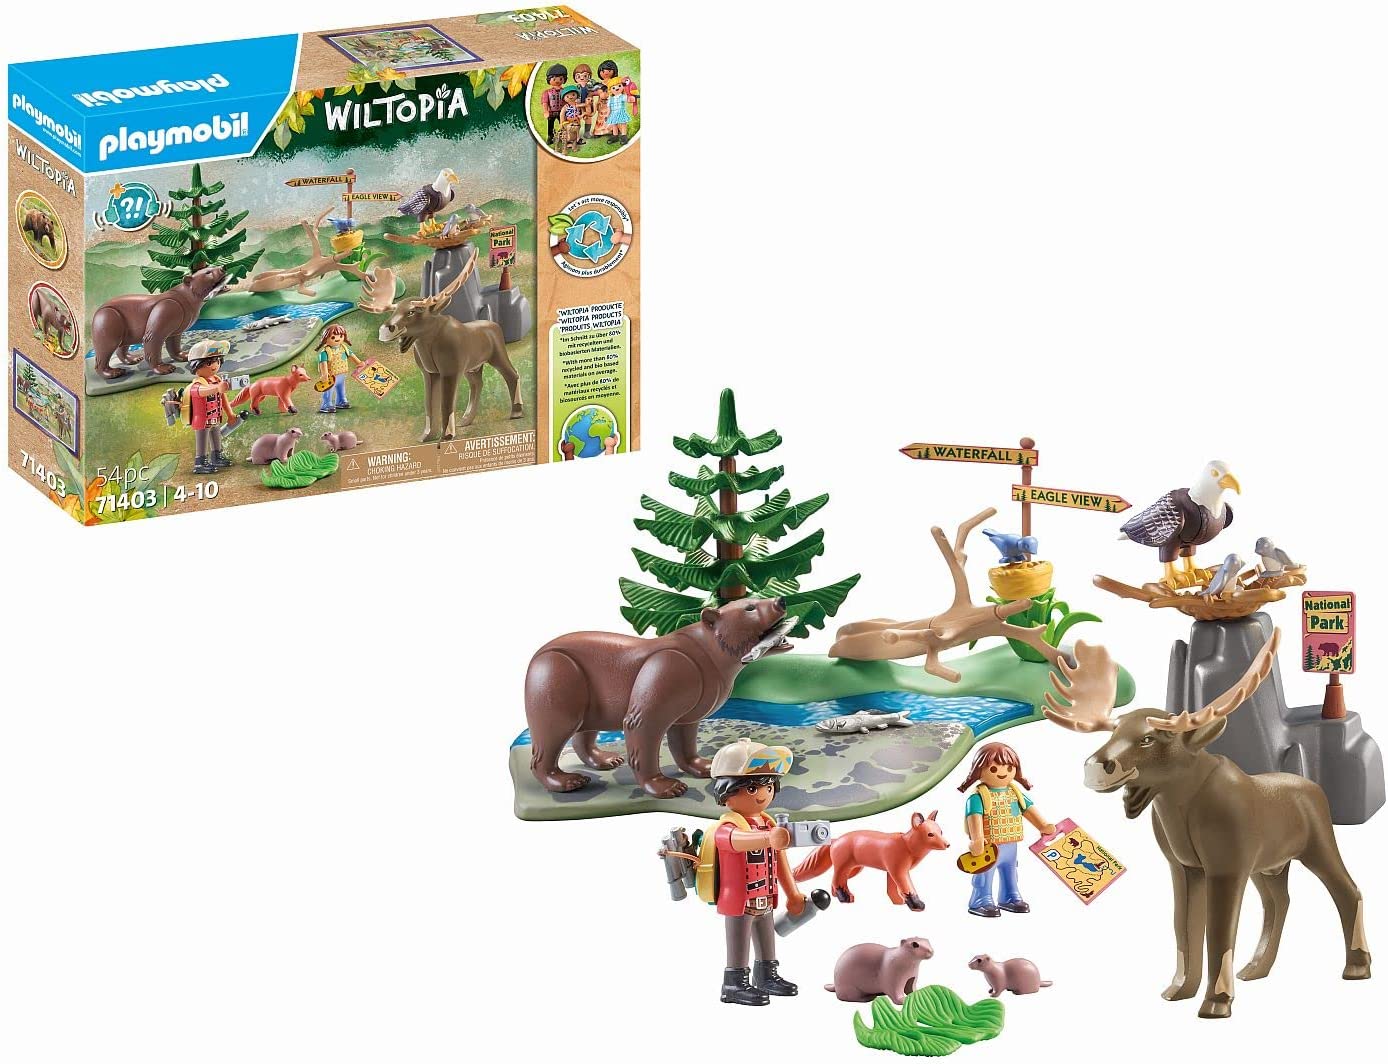 Playmobil a trip to the animals of north America